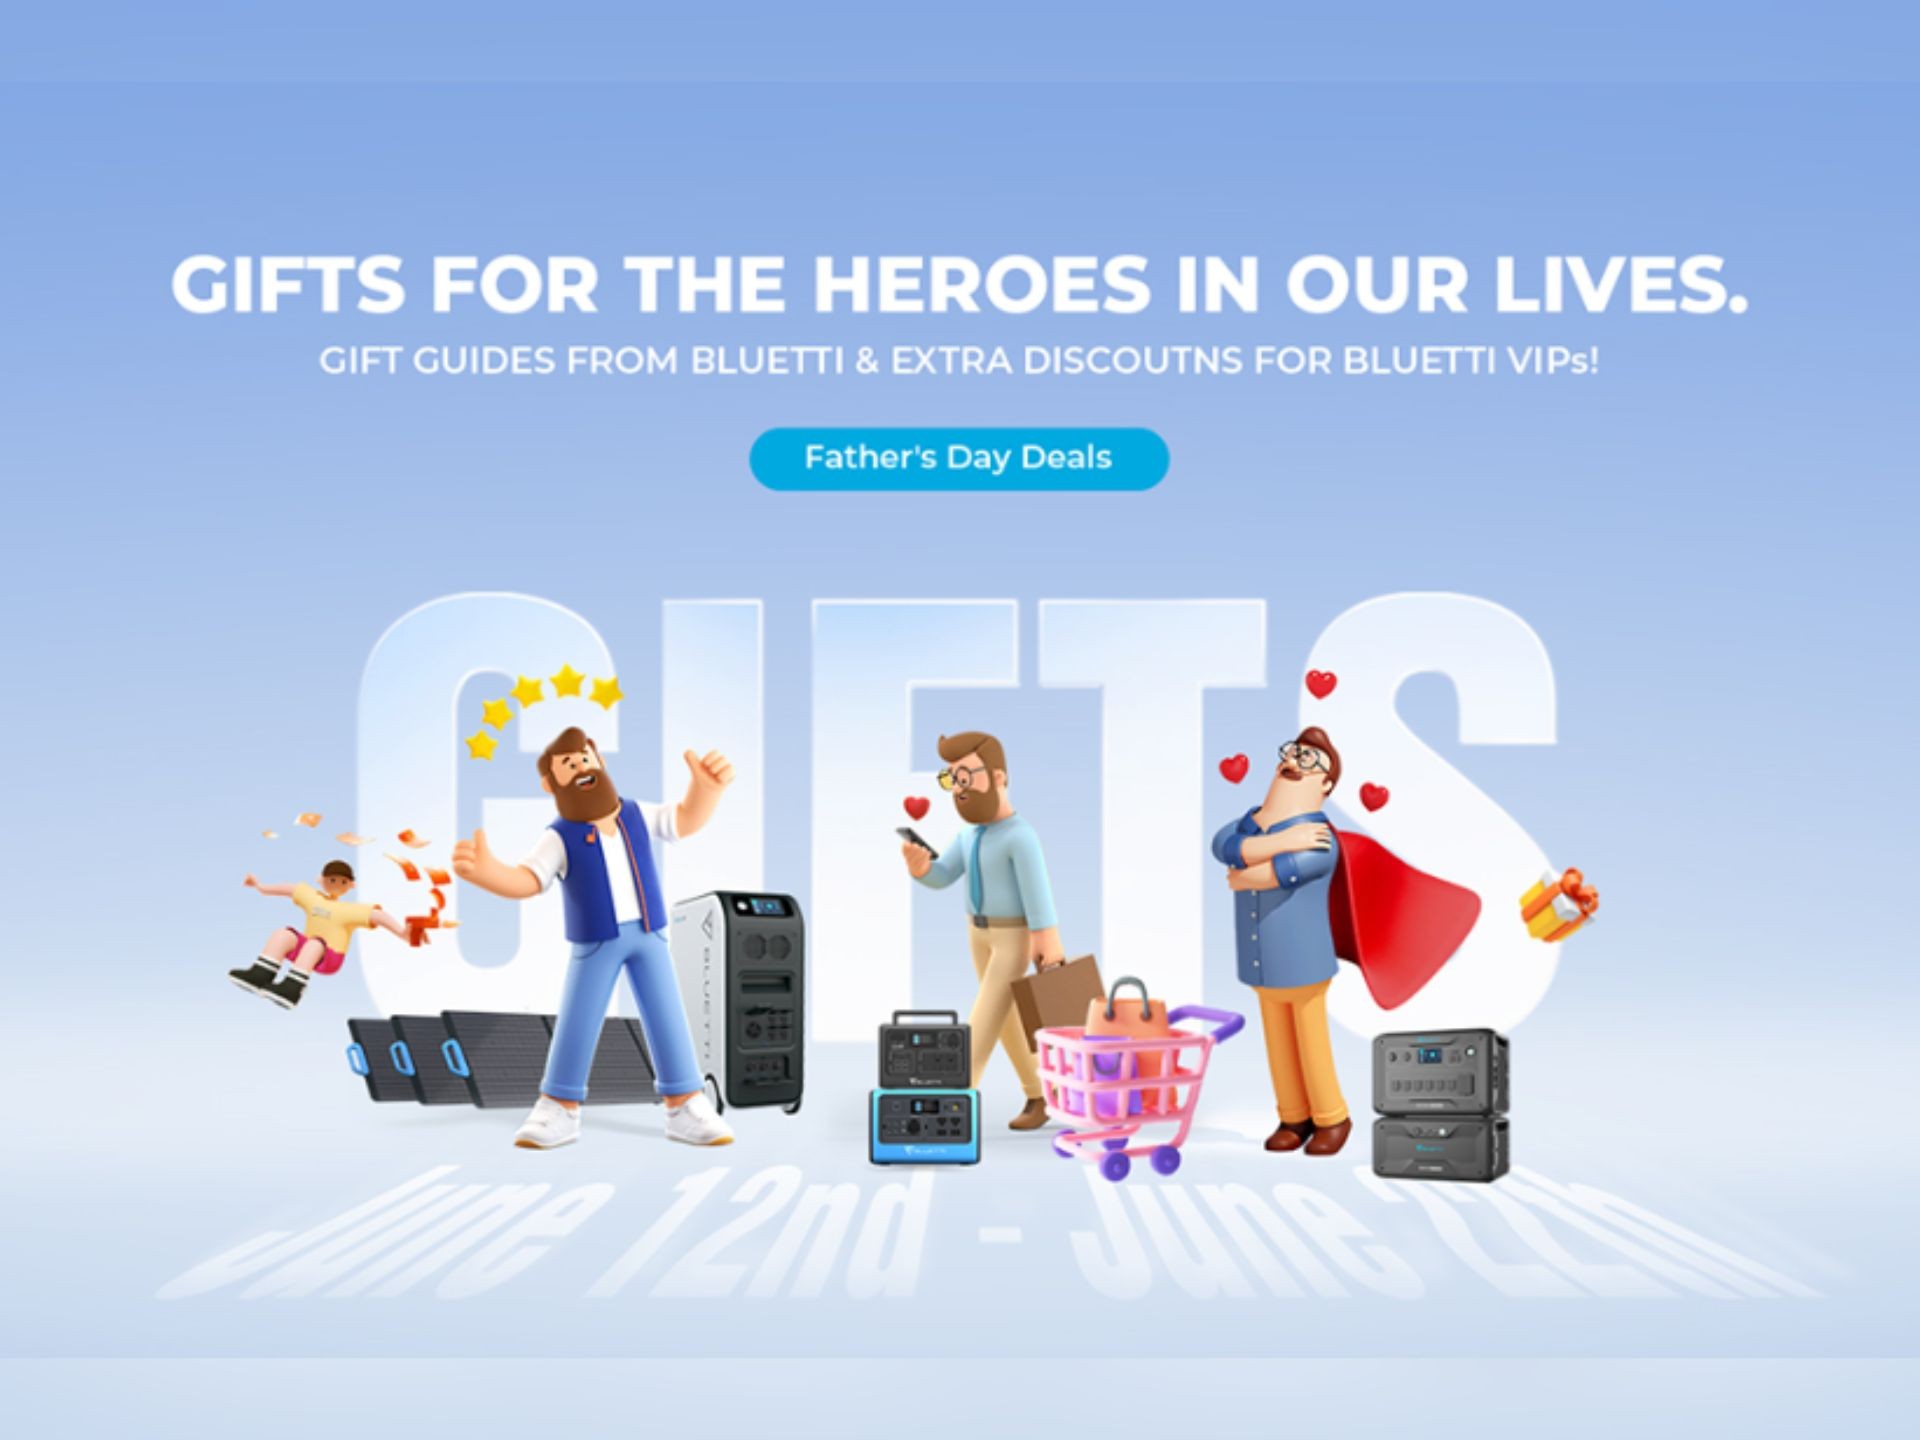 BLUETTI massive discounts this Father’s Day to help Dad stay off grid